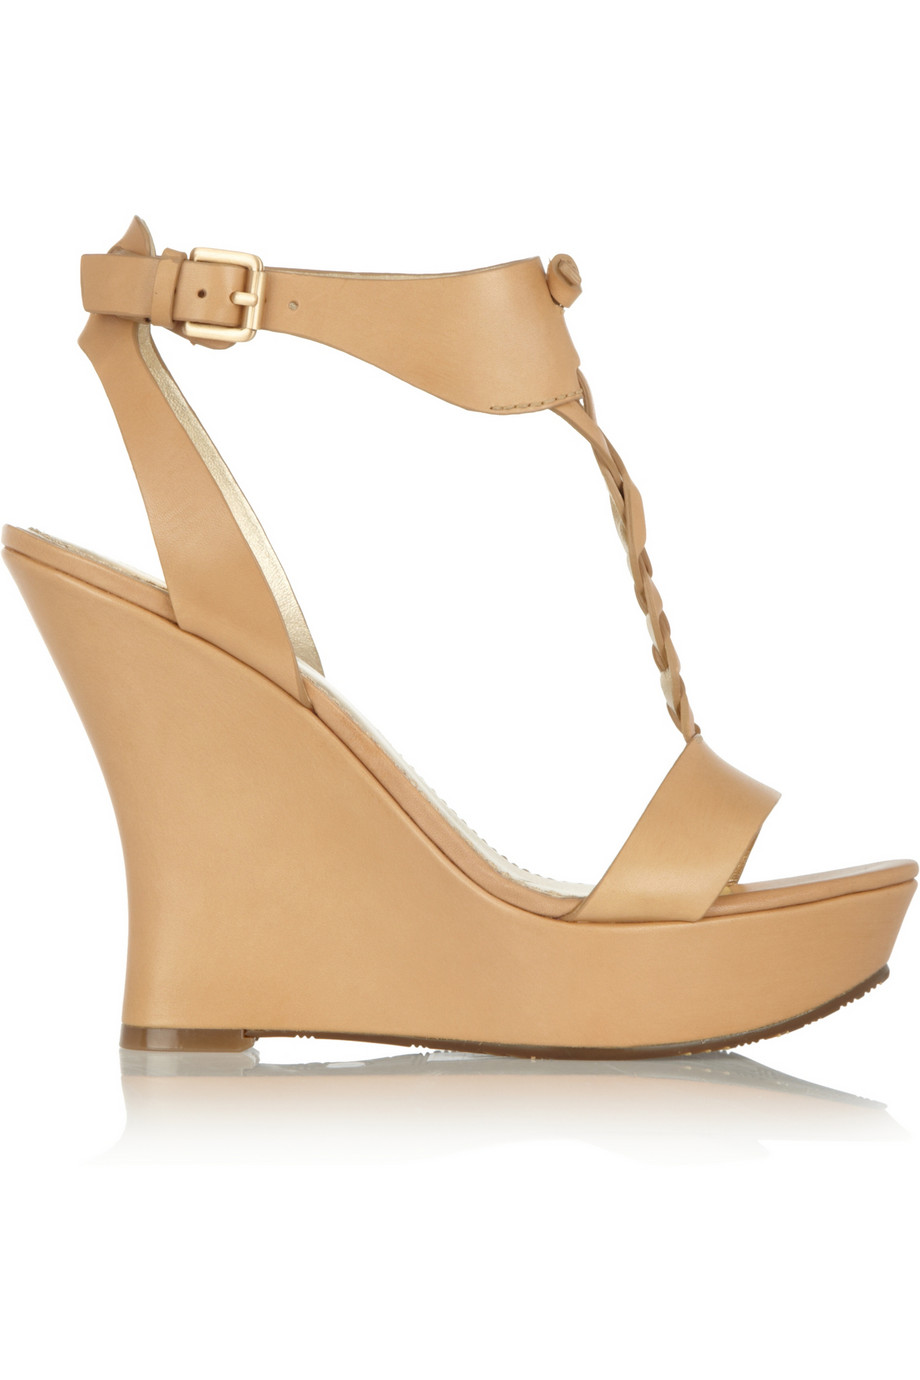 Belle by sigerson morrison Leather Wedge Sandals in Natural | Lyst